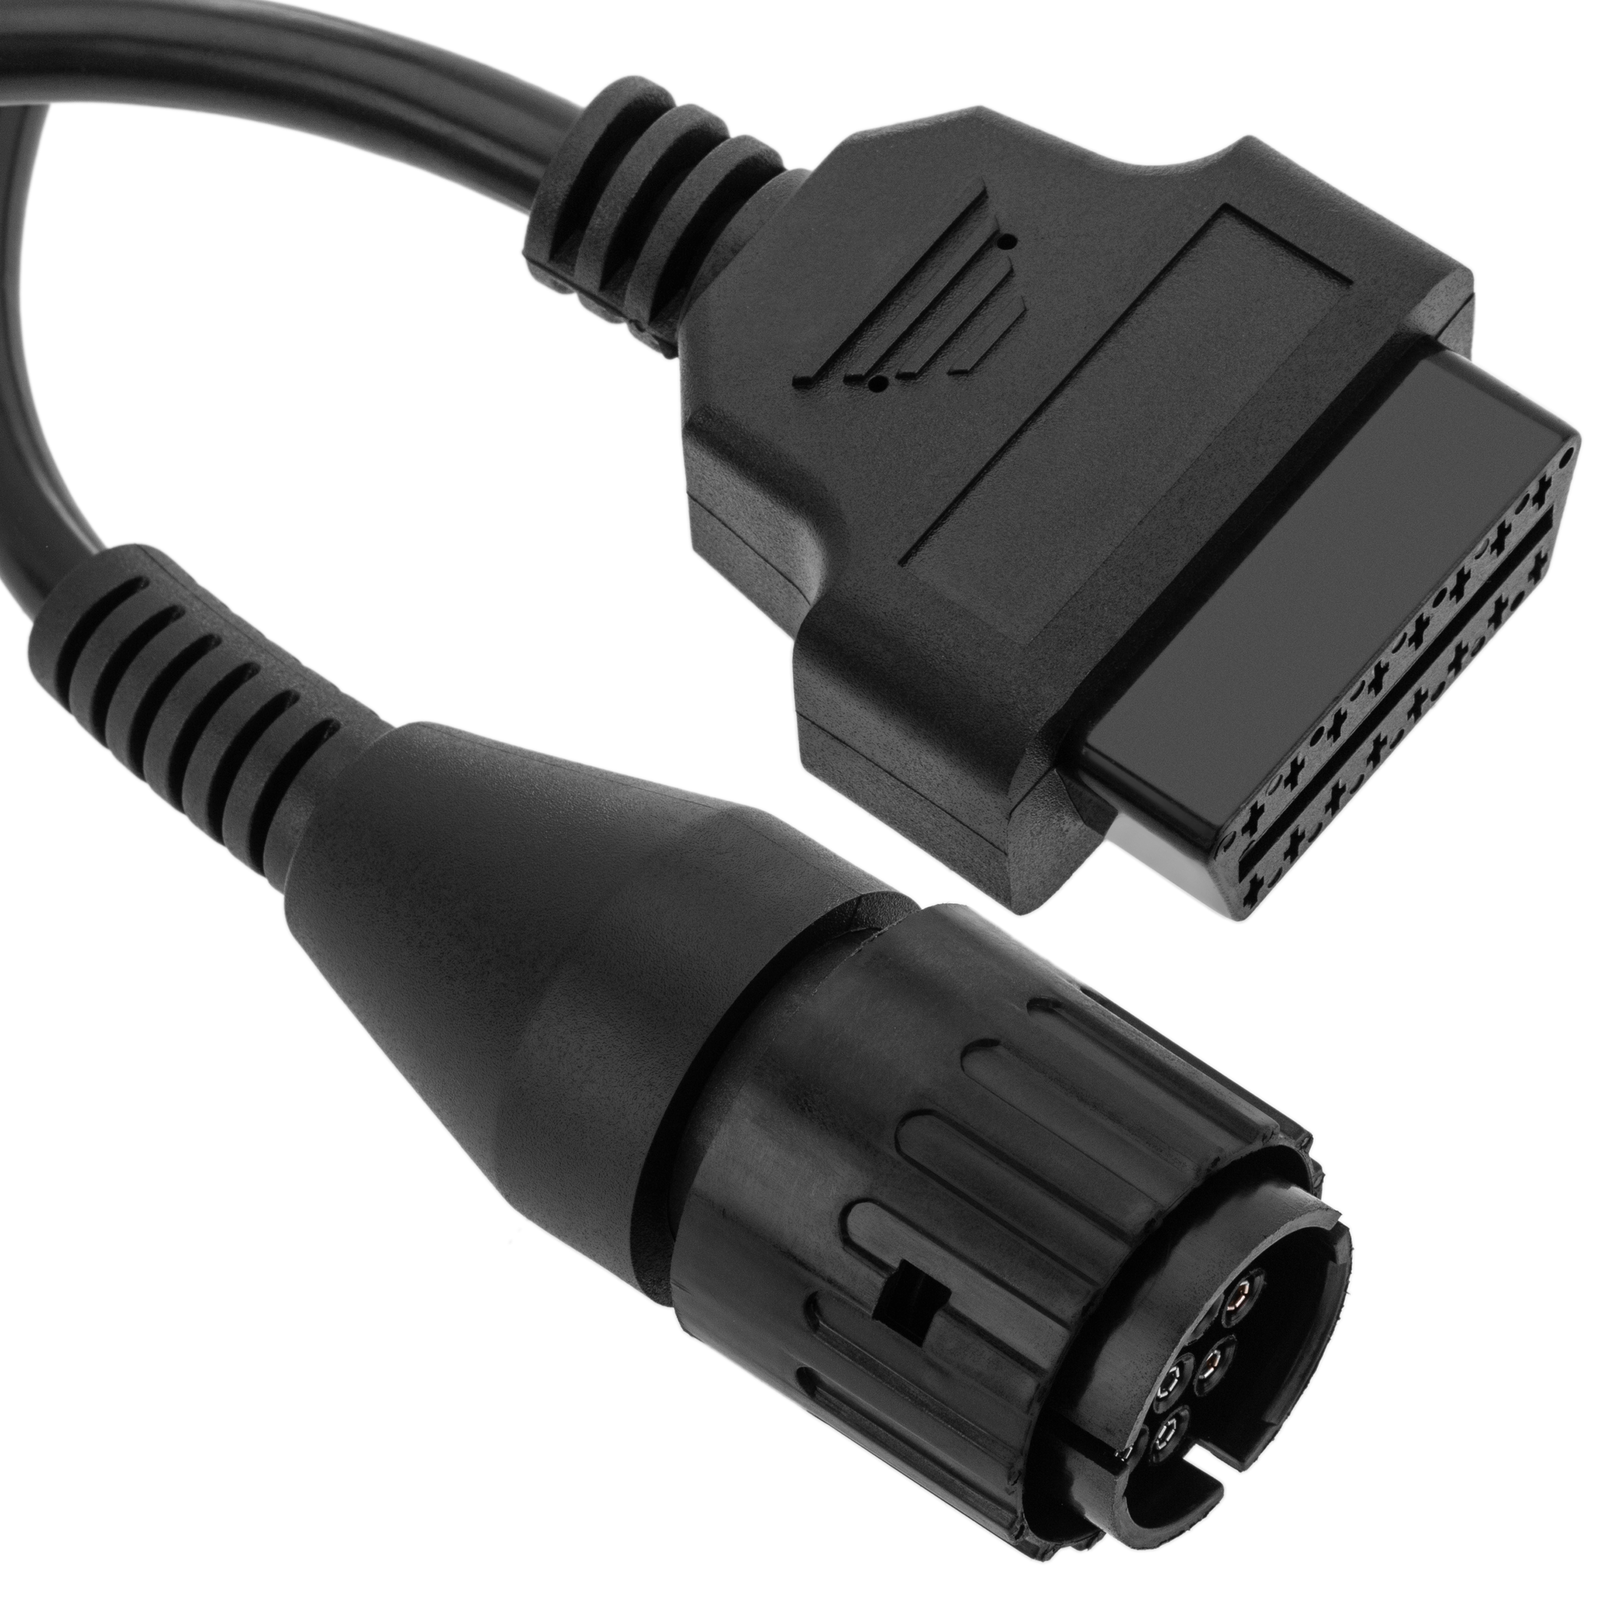 OBD2 10 pin diagnostic cable compatible with BMW motorcycles